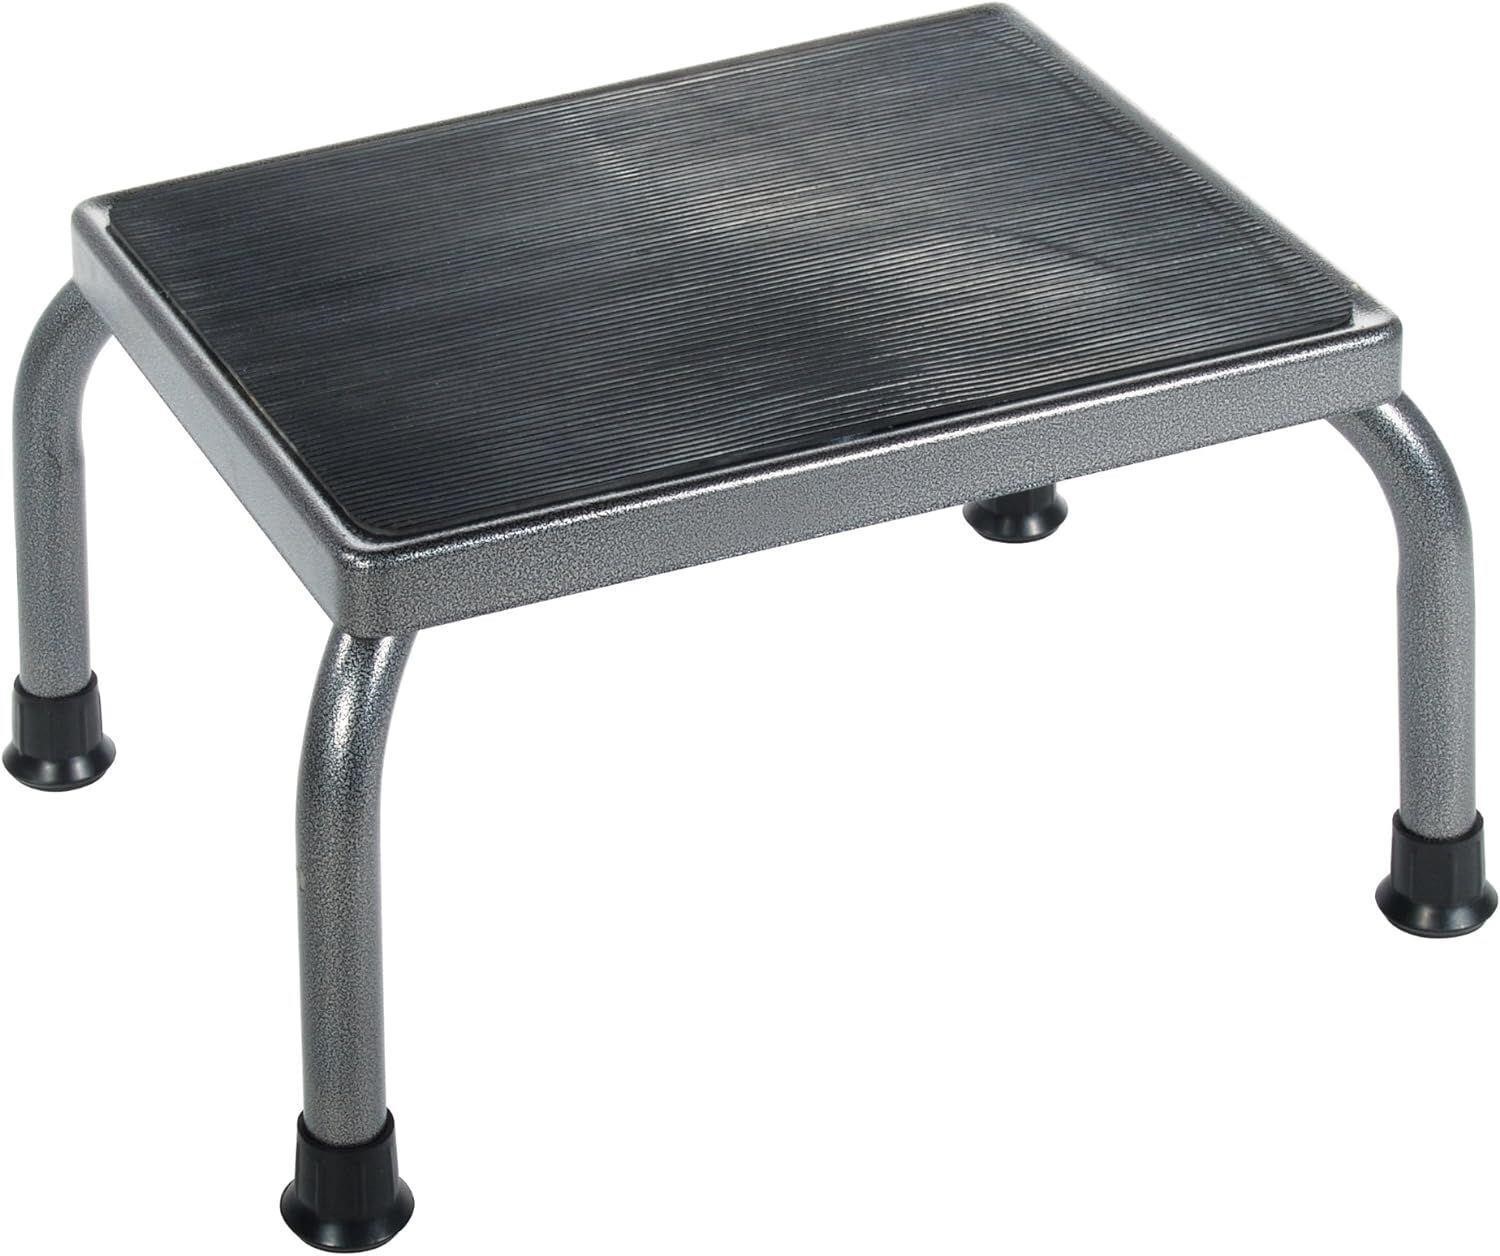 NEW  Drive Medical Footstool with Non Skid